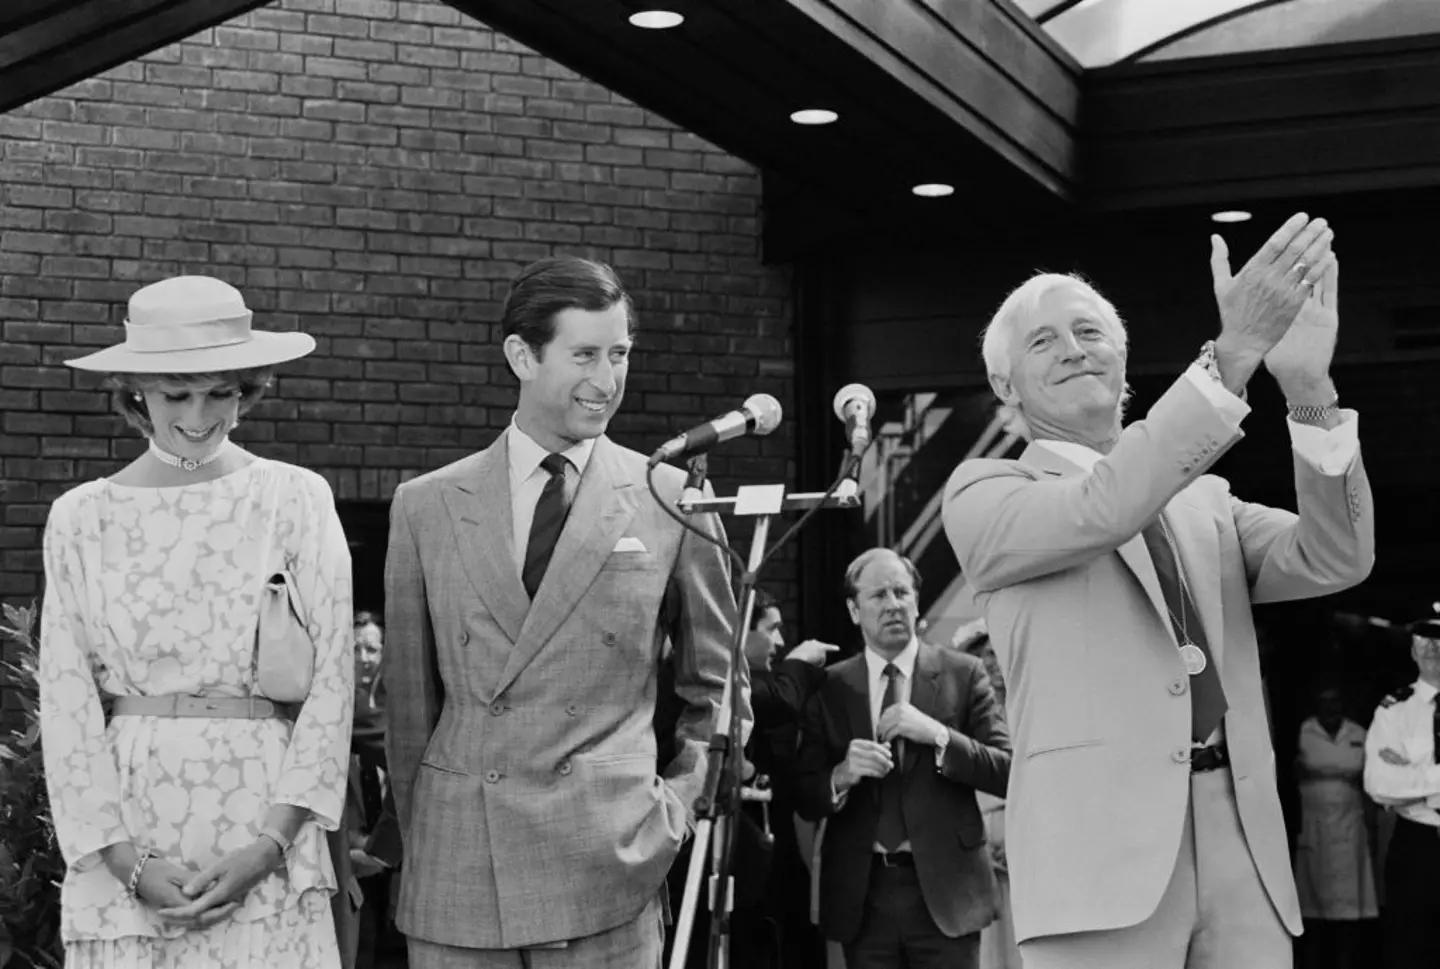 Saville, pictured with Prince Charles and Princess Diana in 1983, deceived and manipulated millions during his long-winded career. (Hilaria McCarthy/Daily Express/Hulton Archive/Getty Images)